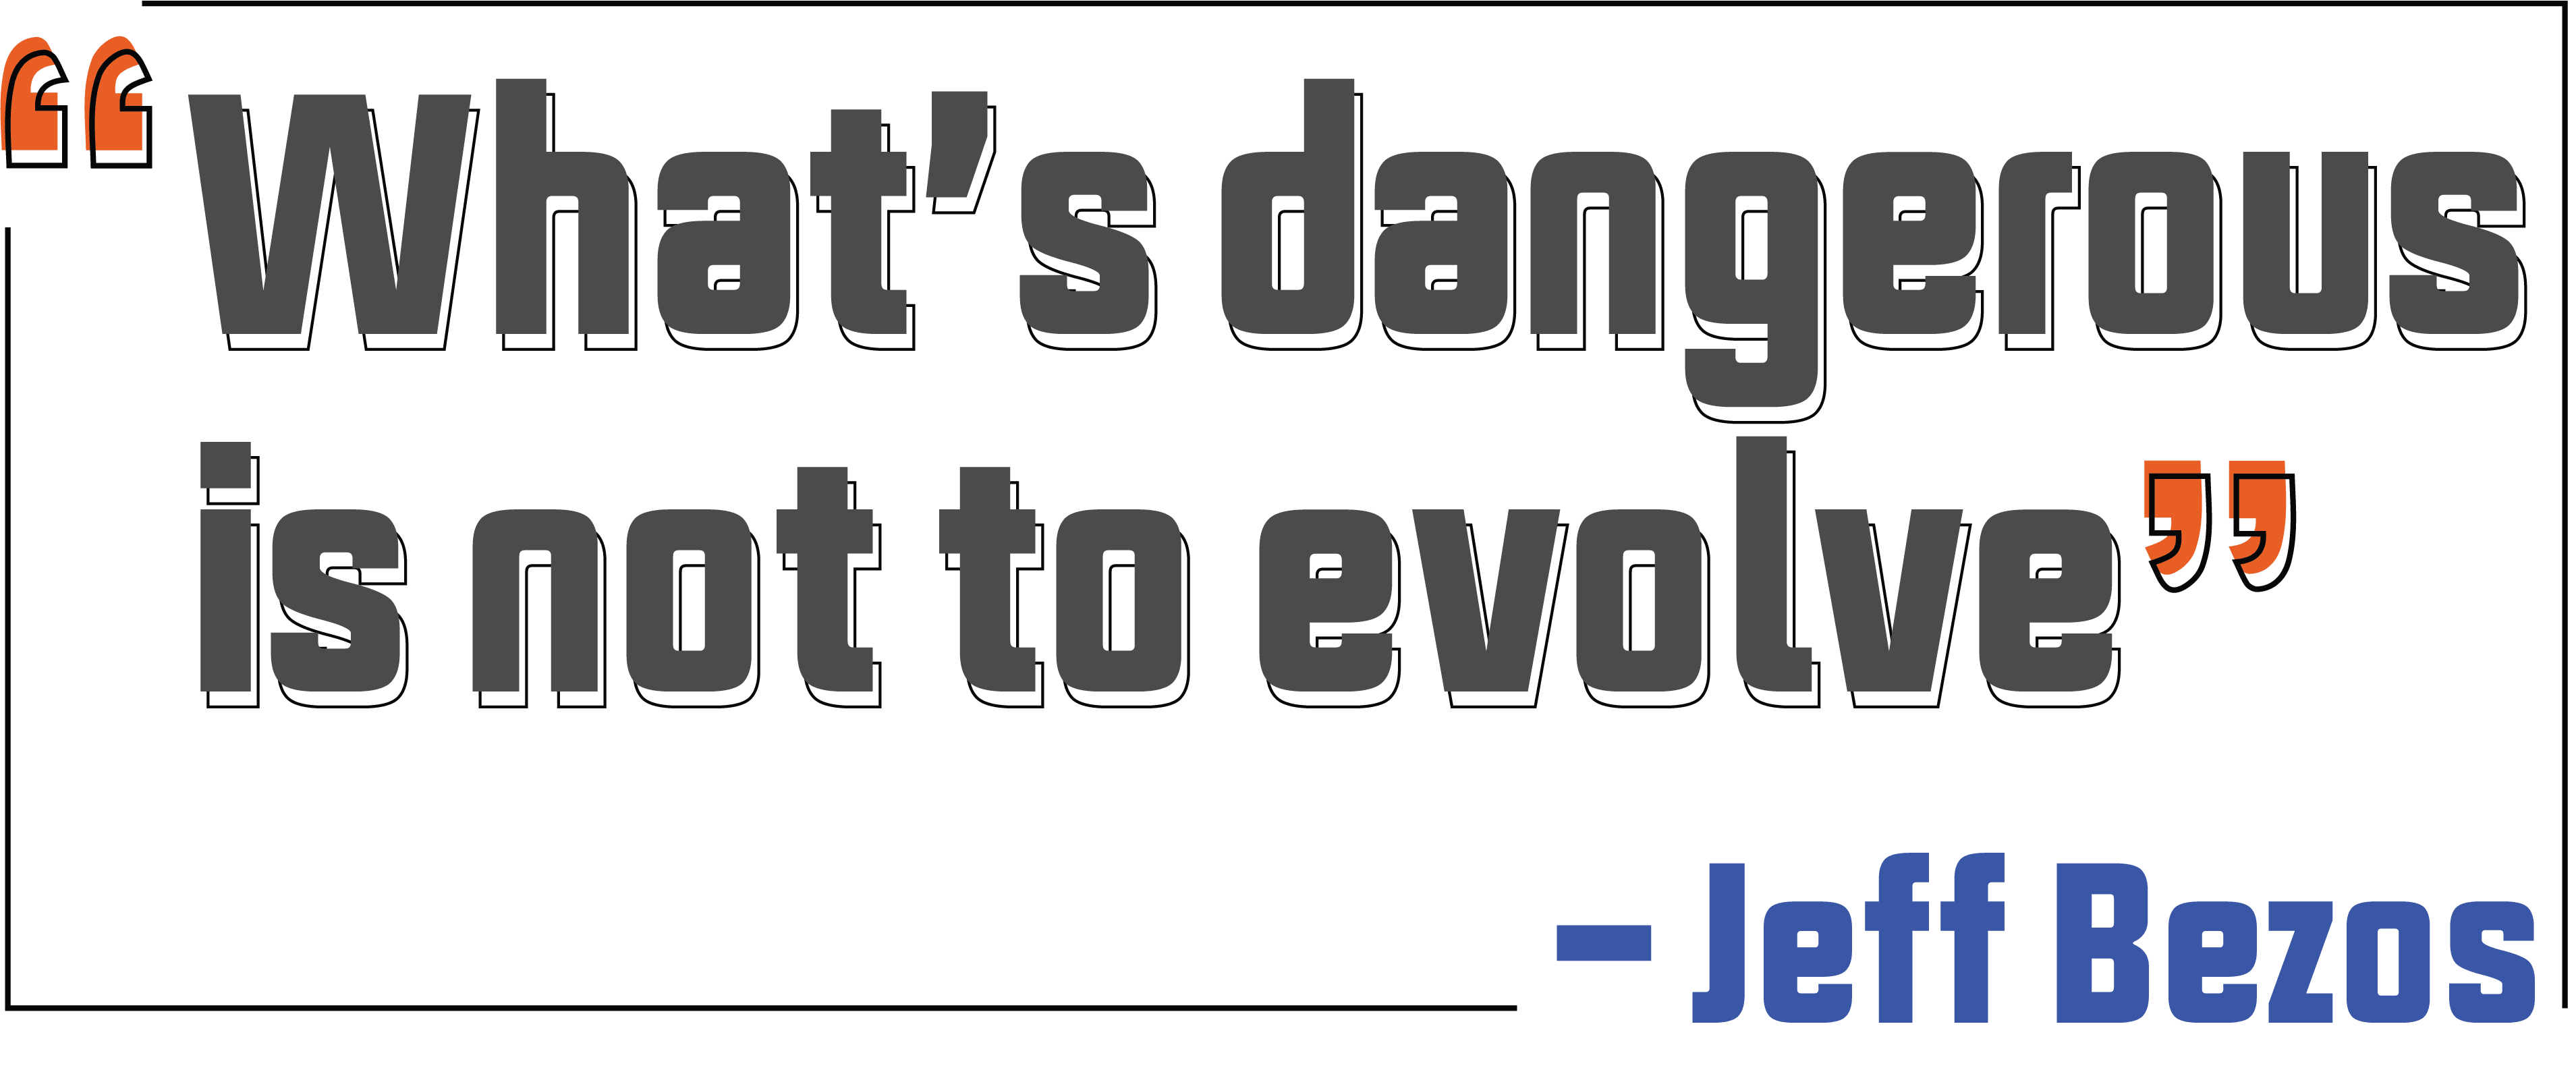 What is dangerous is not to evolve